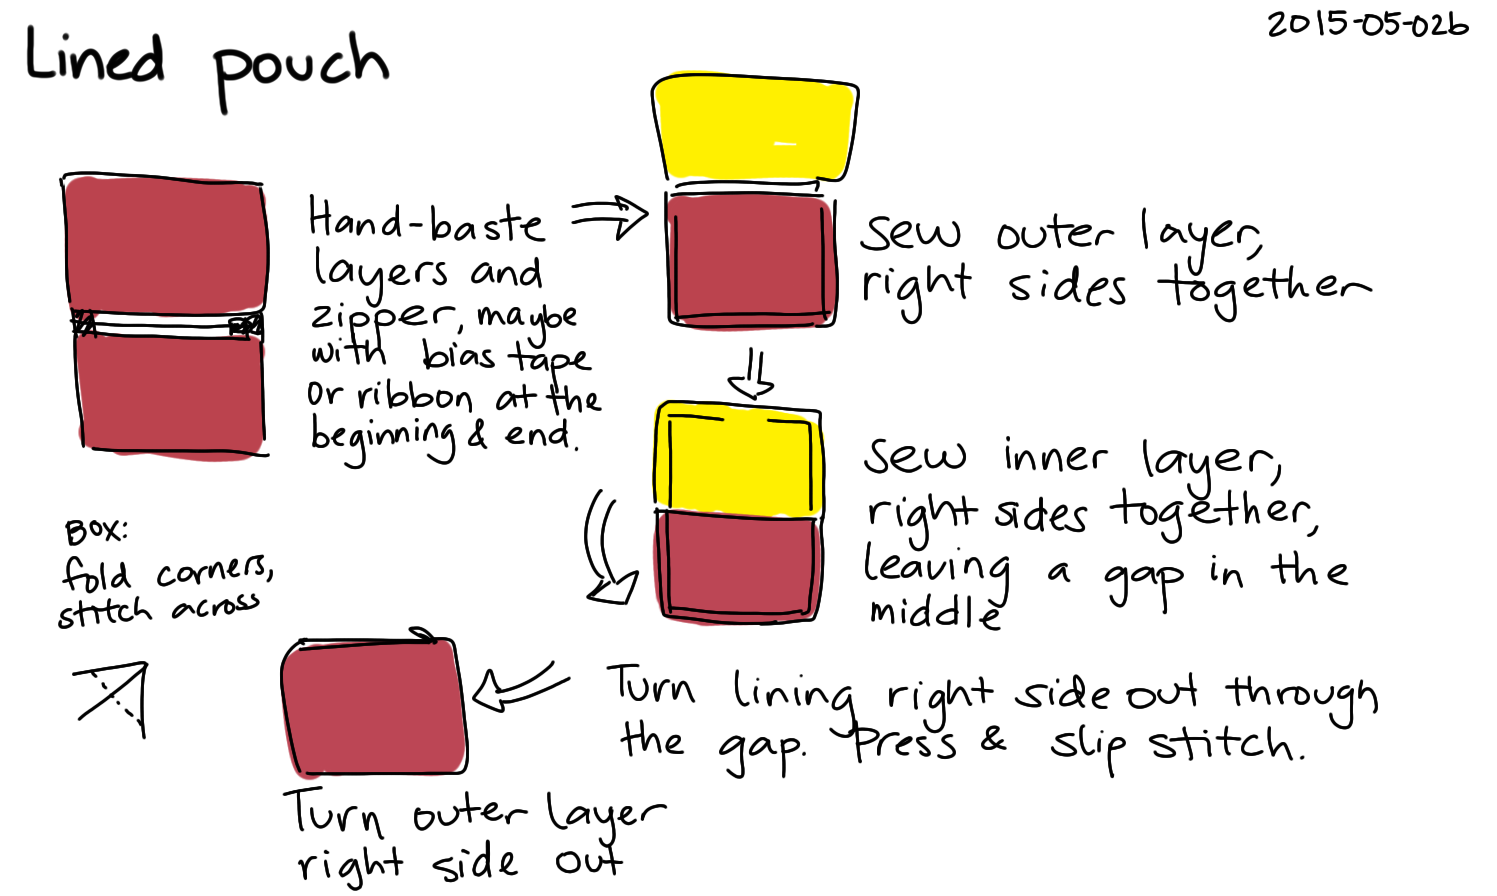 2015-05-02b Lined pouch -- index card #sewing.png